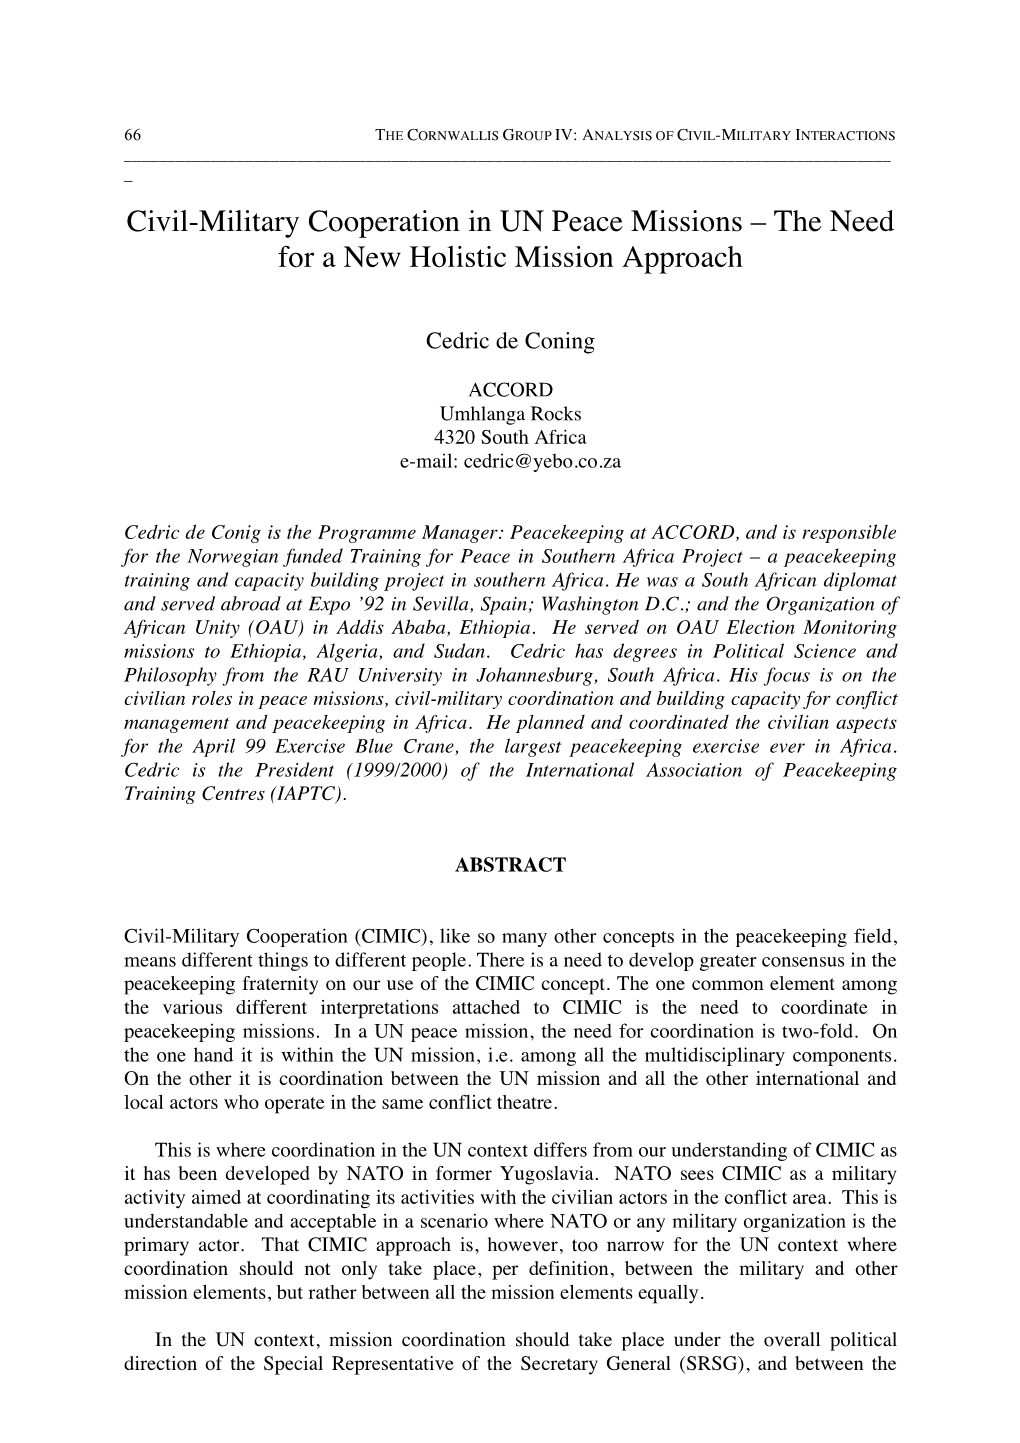 Civil-Military Cooperation in UN Peace Missions – the Need for a New Holistic Mission Approach